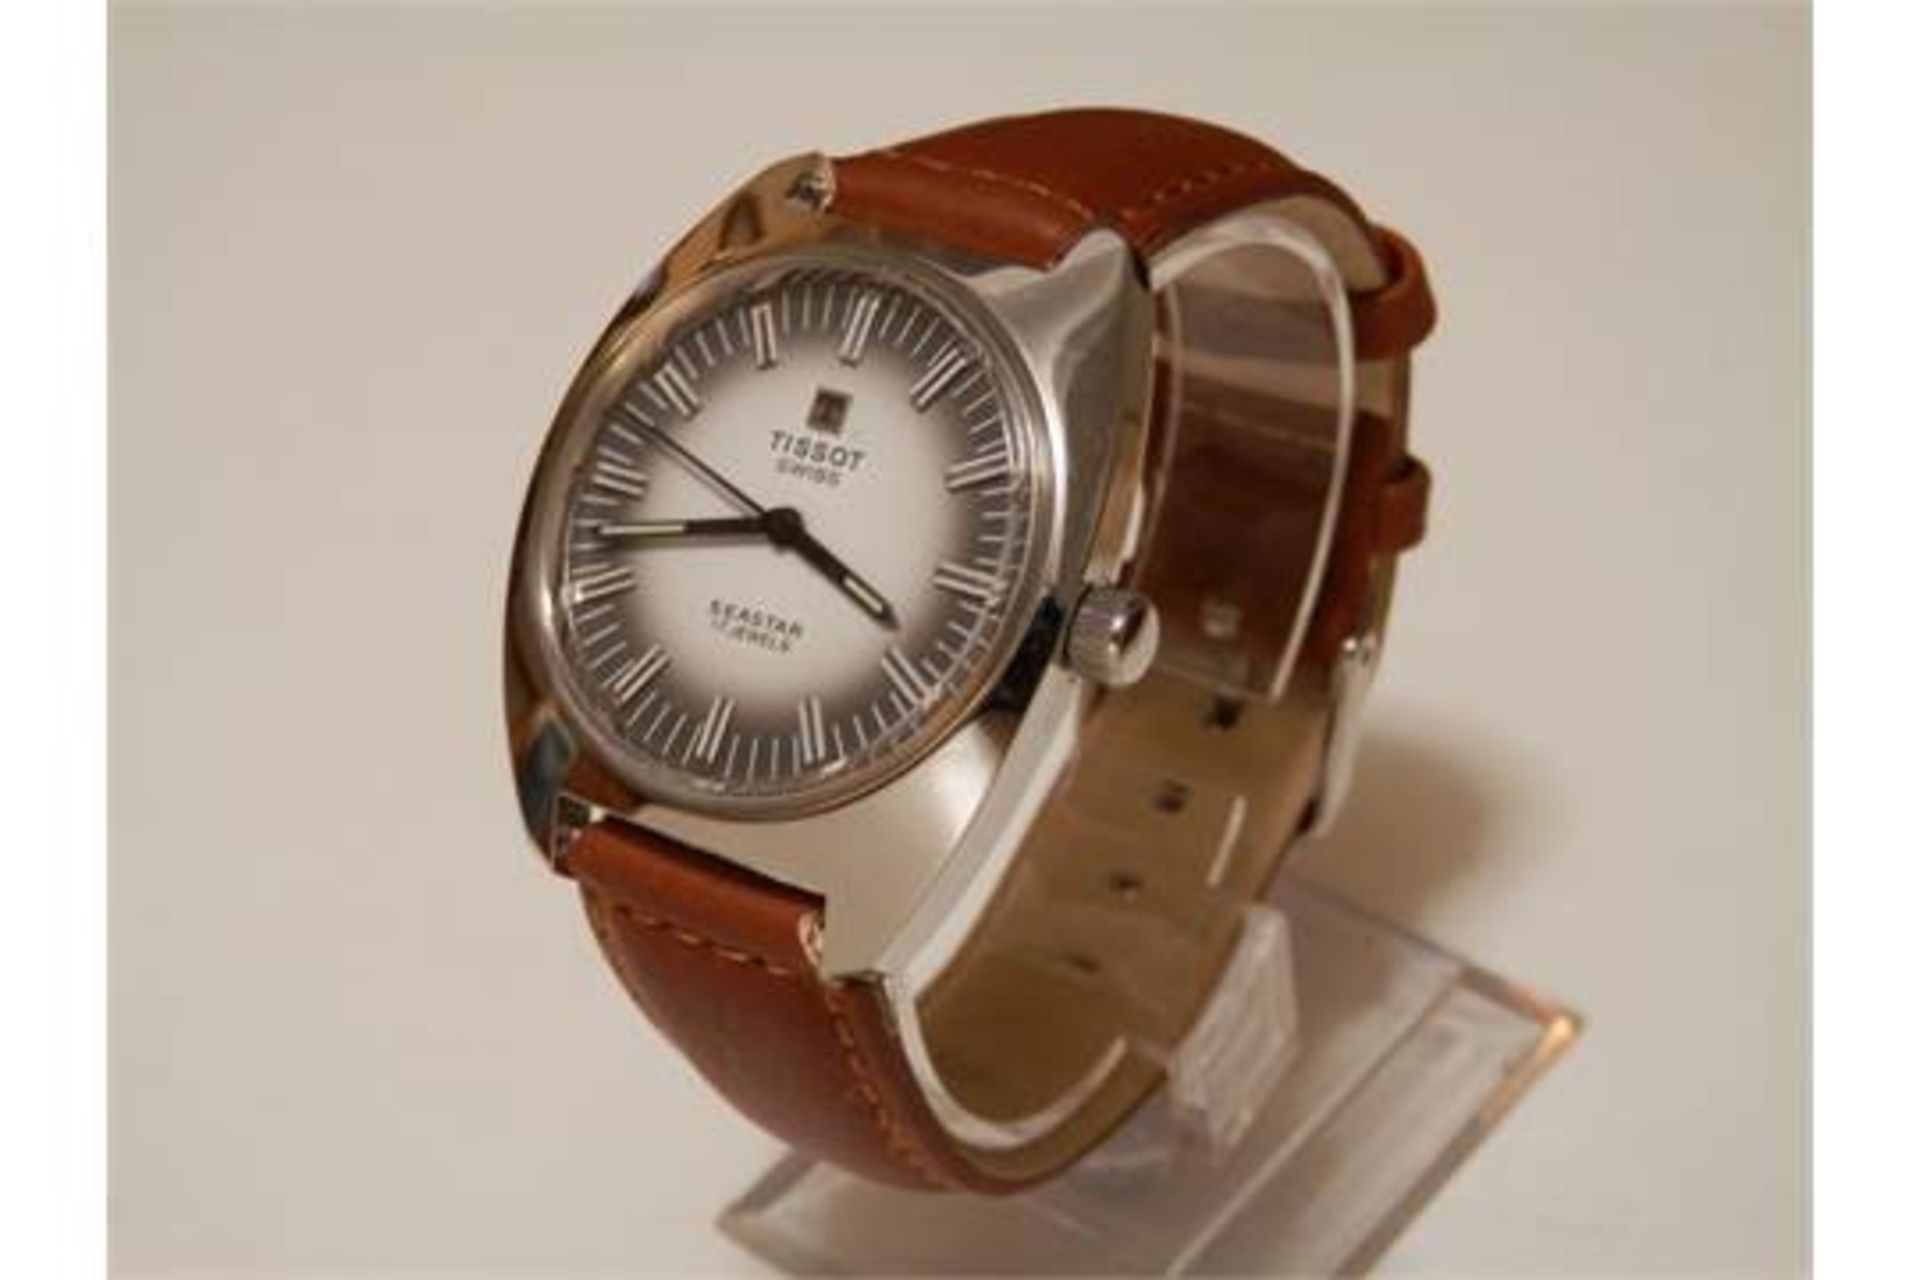 SUPERB GENTS TISSOT SEASTAR, POSSIBLY NEW/OLD STOCK 1970S 17 JEWEL SWISS WATCH (#3 of 3 available)